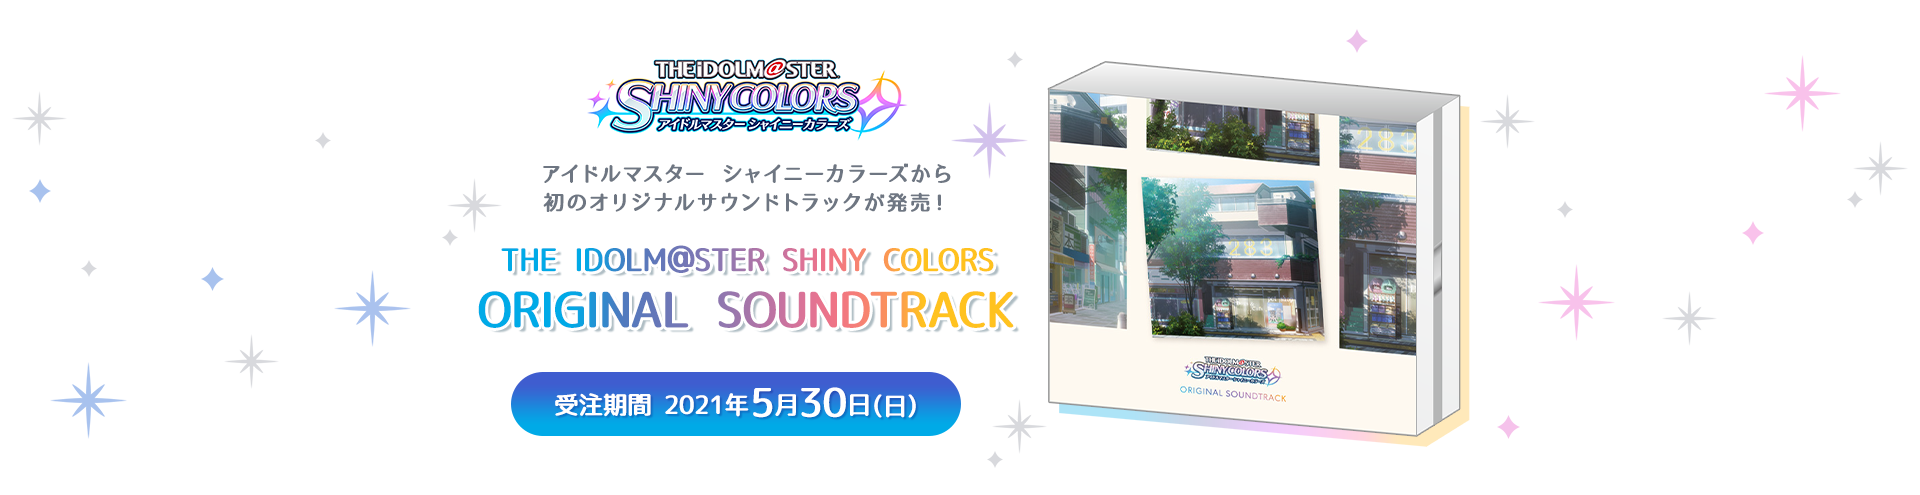 THE IDOLM@STER SHINY COLORS ORIGINAL SOUNDTRACK | アソビストア